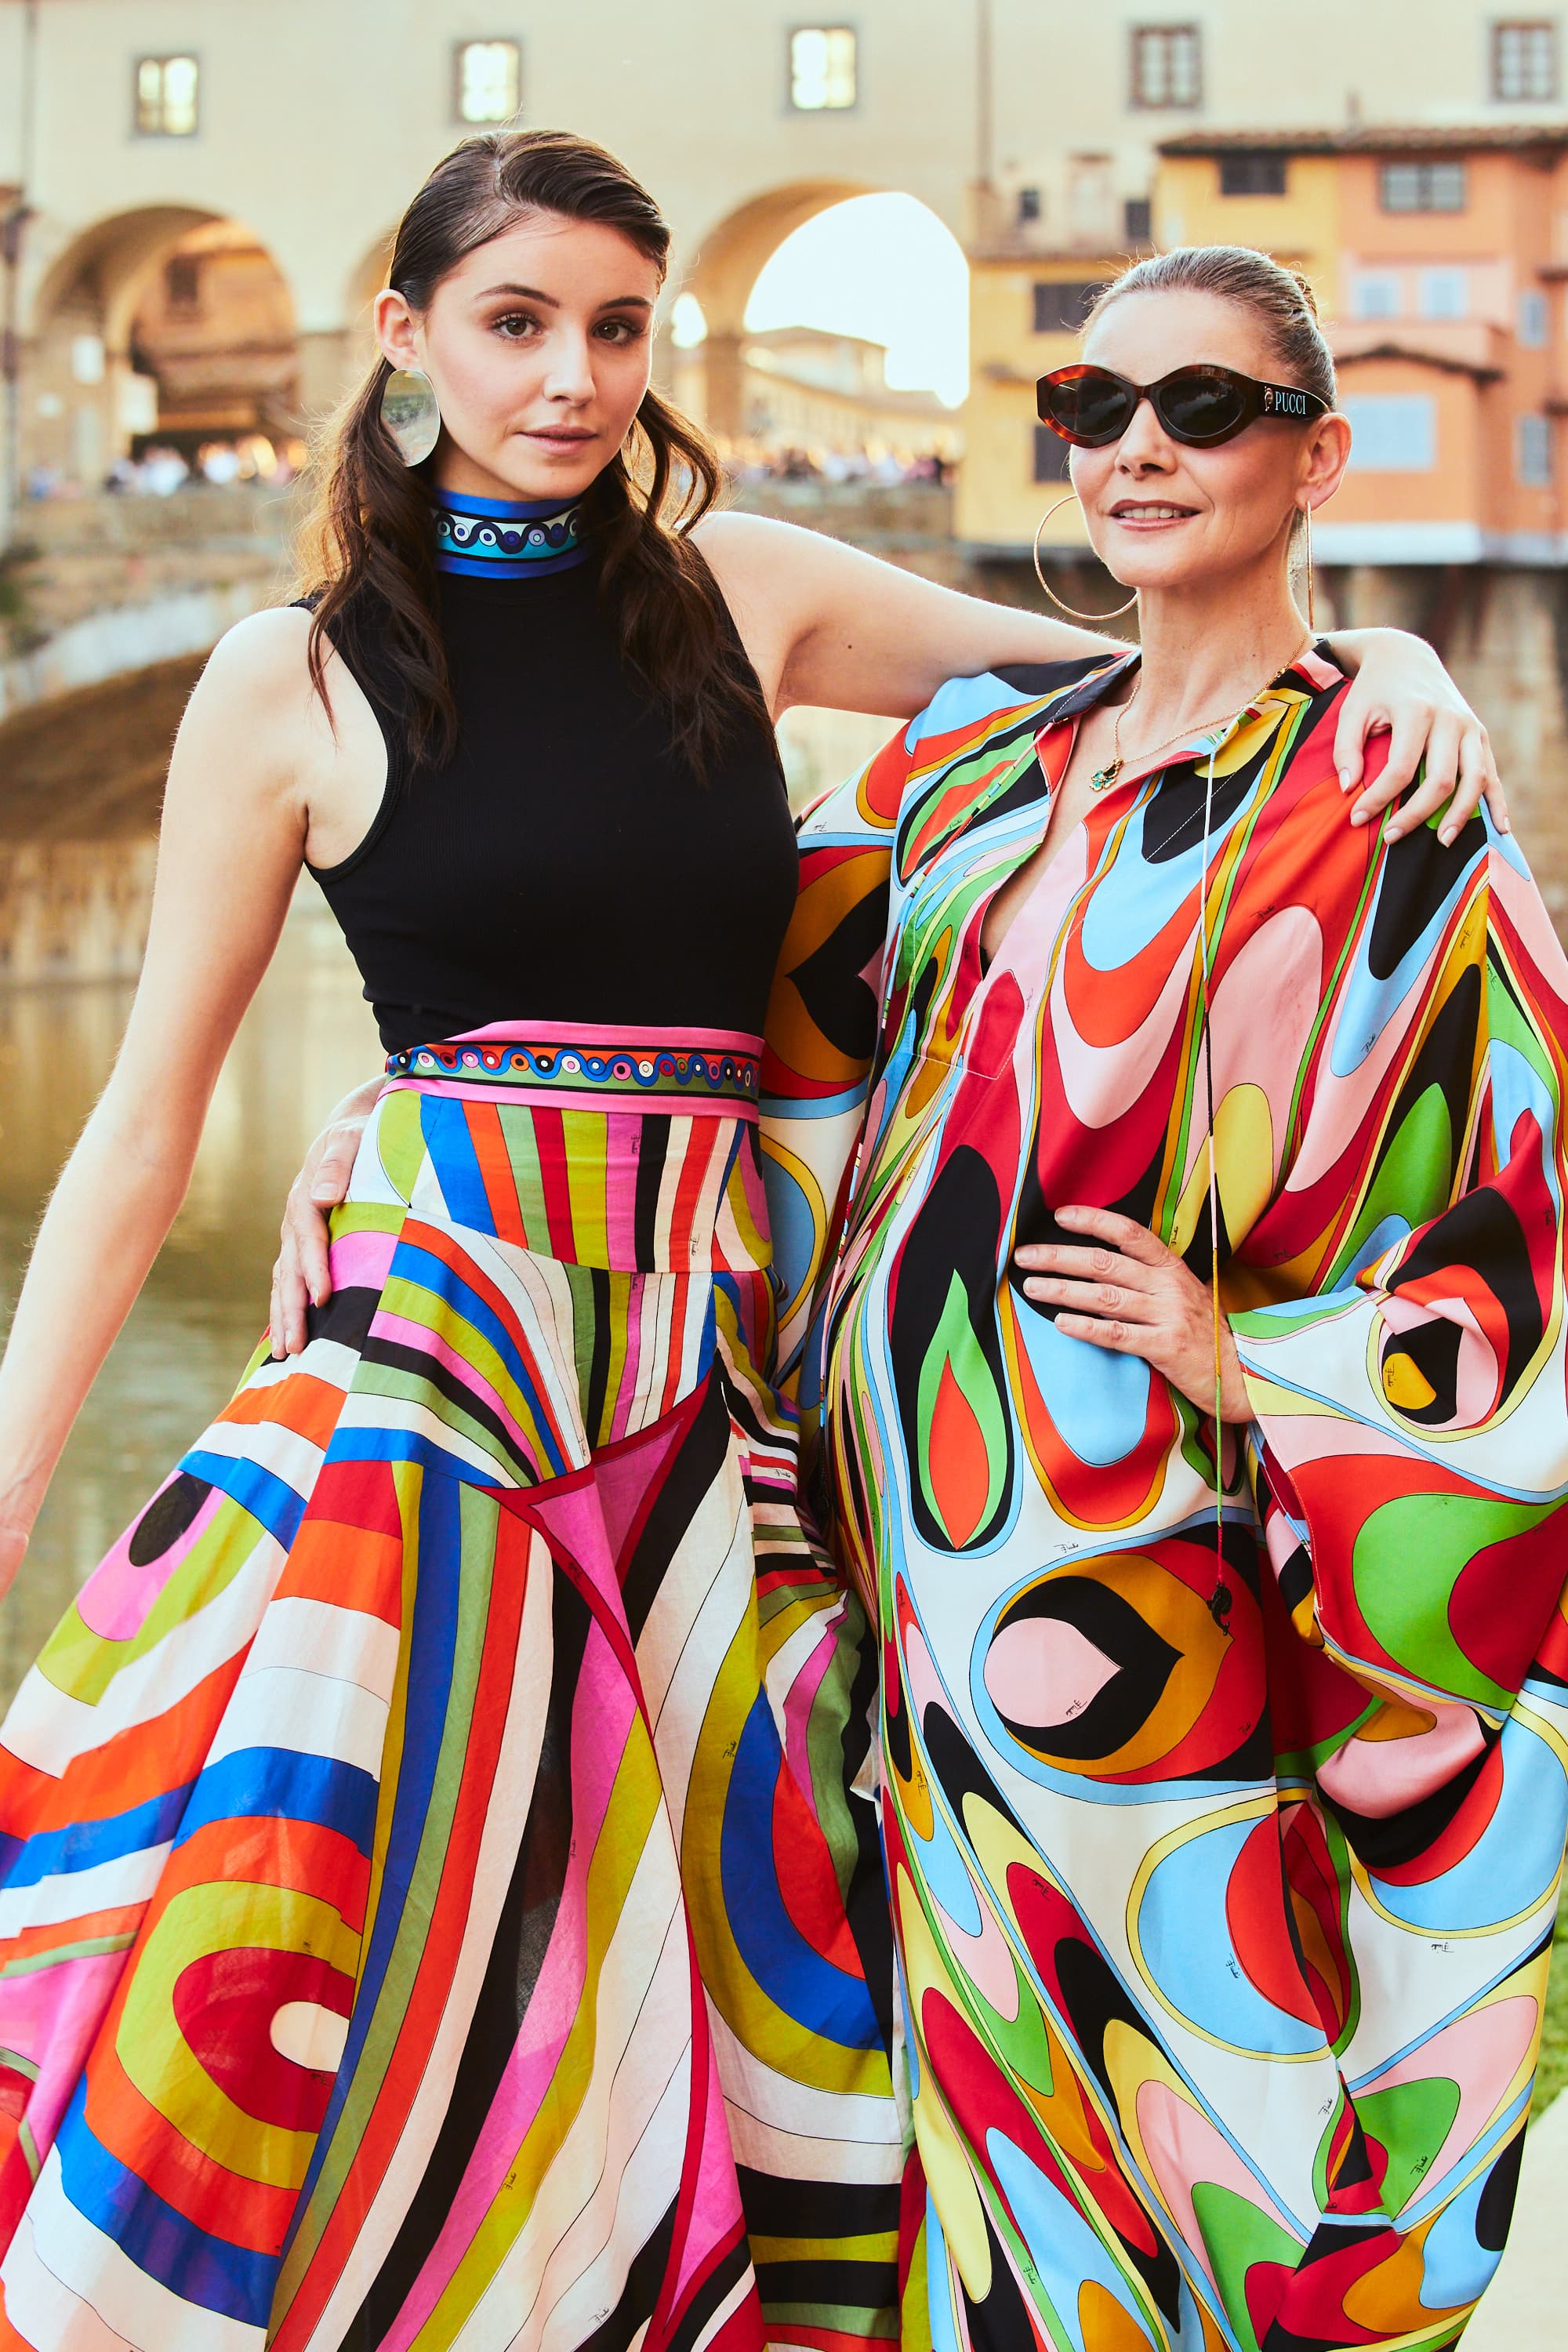 Celebrating National Traditions: Emilio Pucci and the “Palio